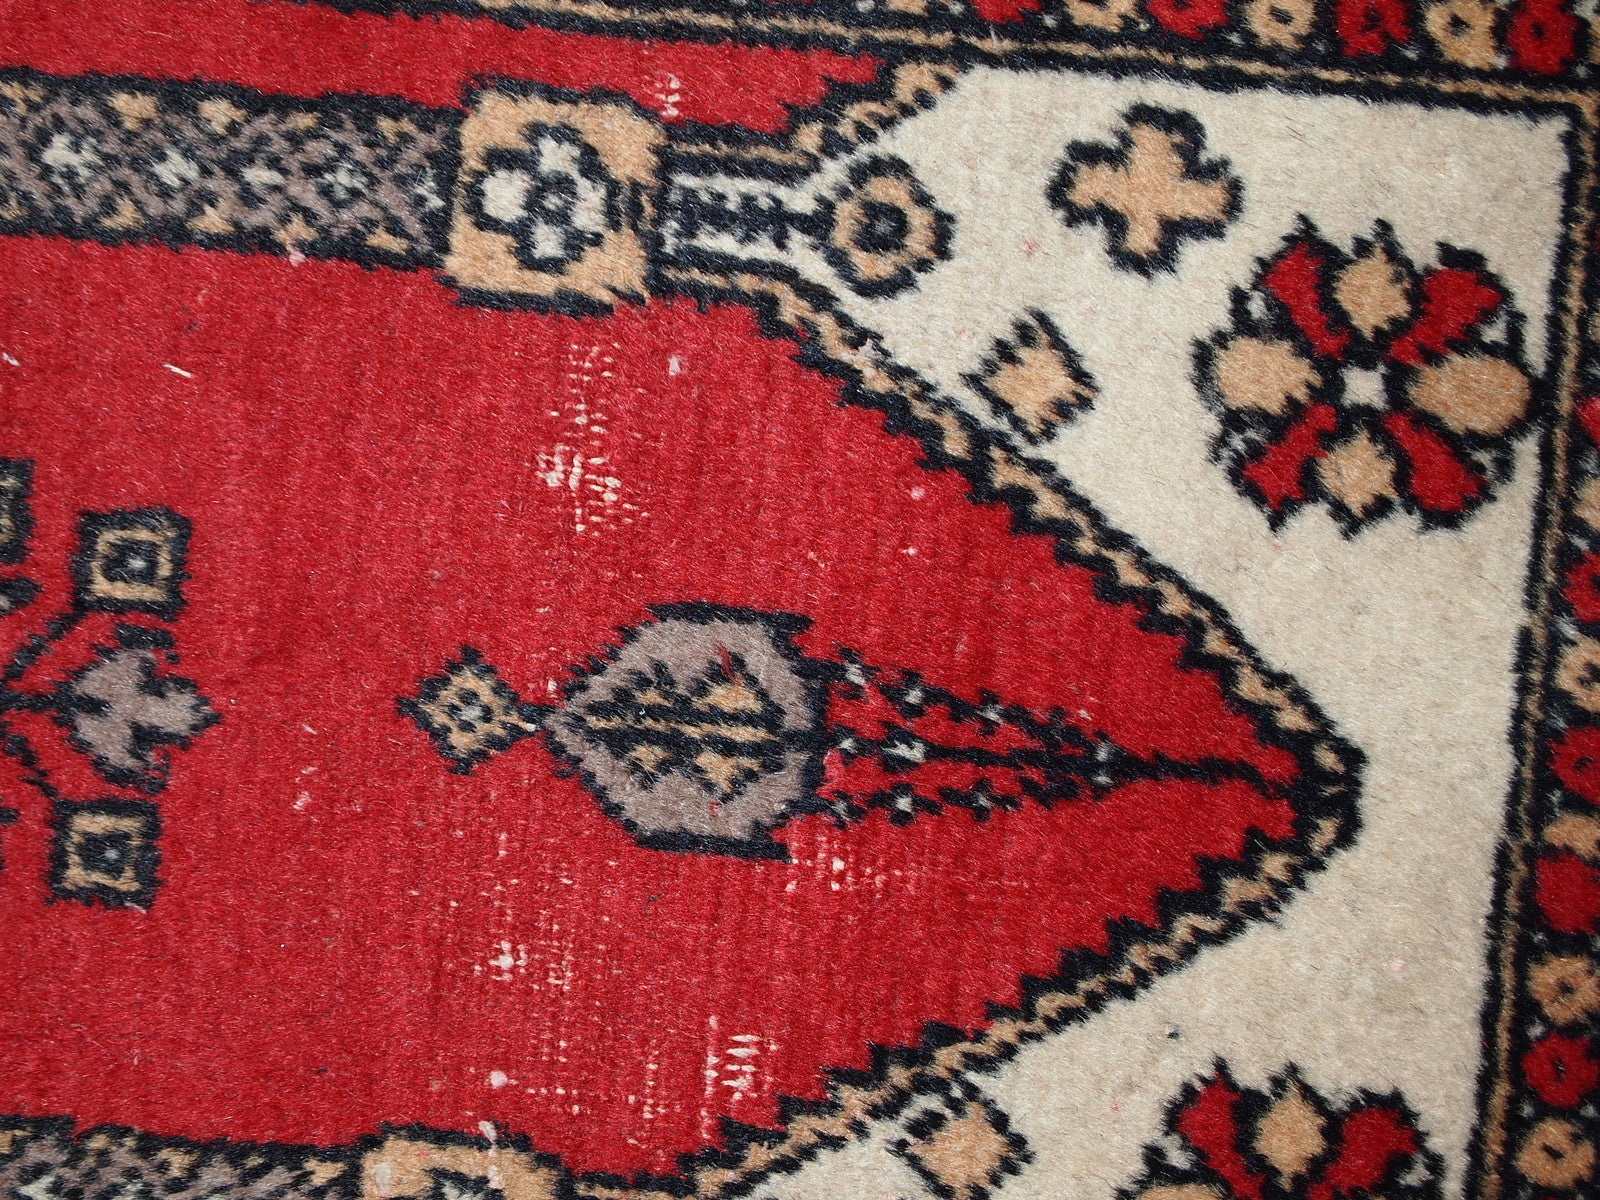 Vintage handmade Pakistani Lahore praying rug in original condition, it has some low pile. The rug is from the middle of 20th century.